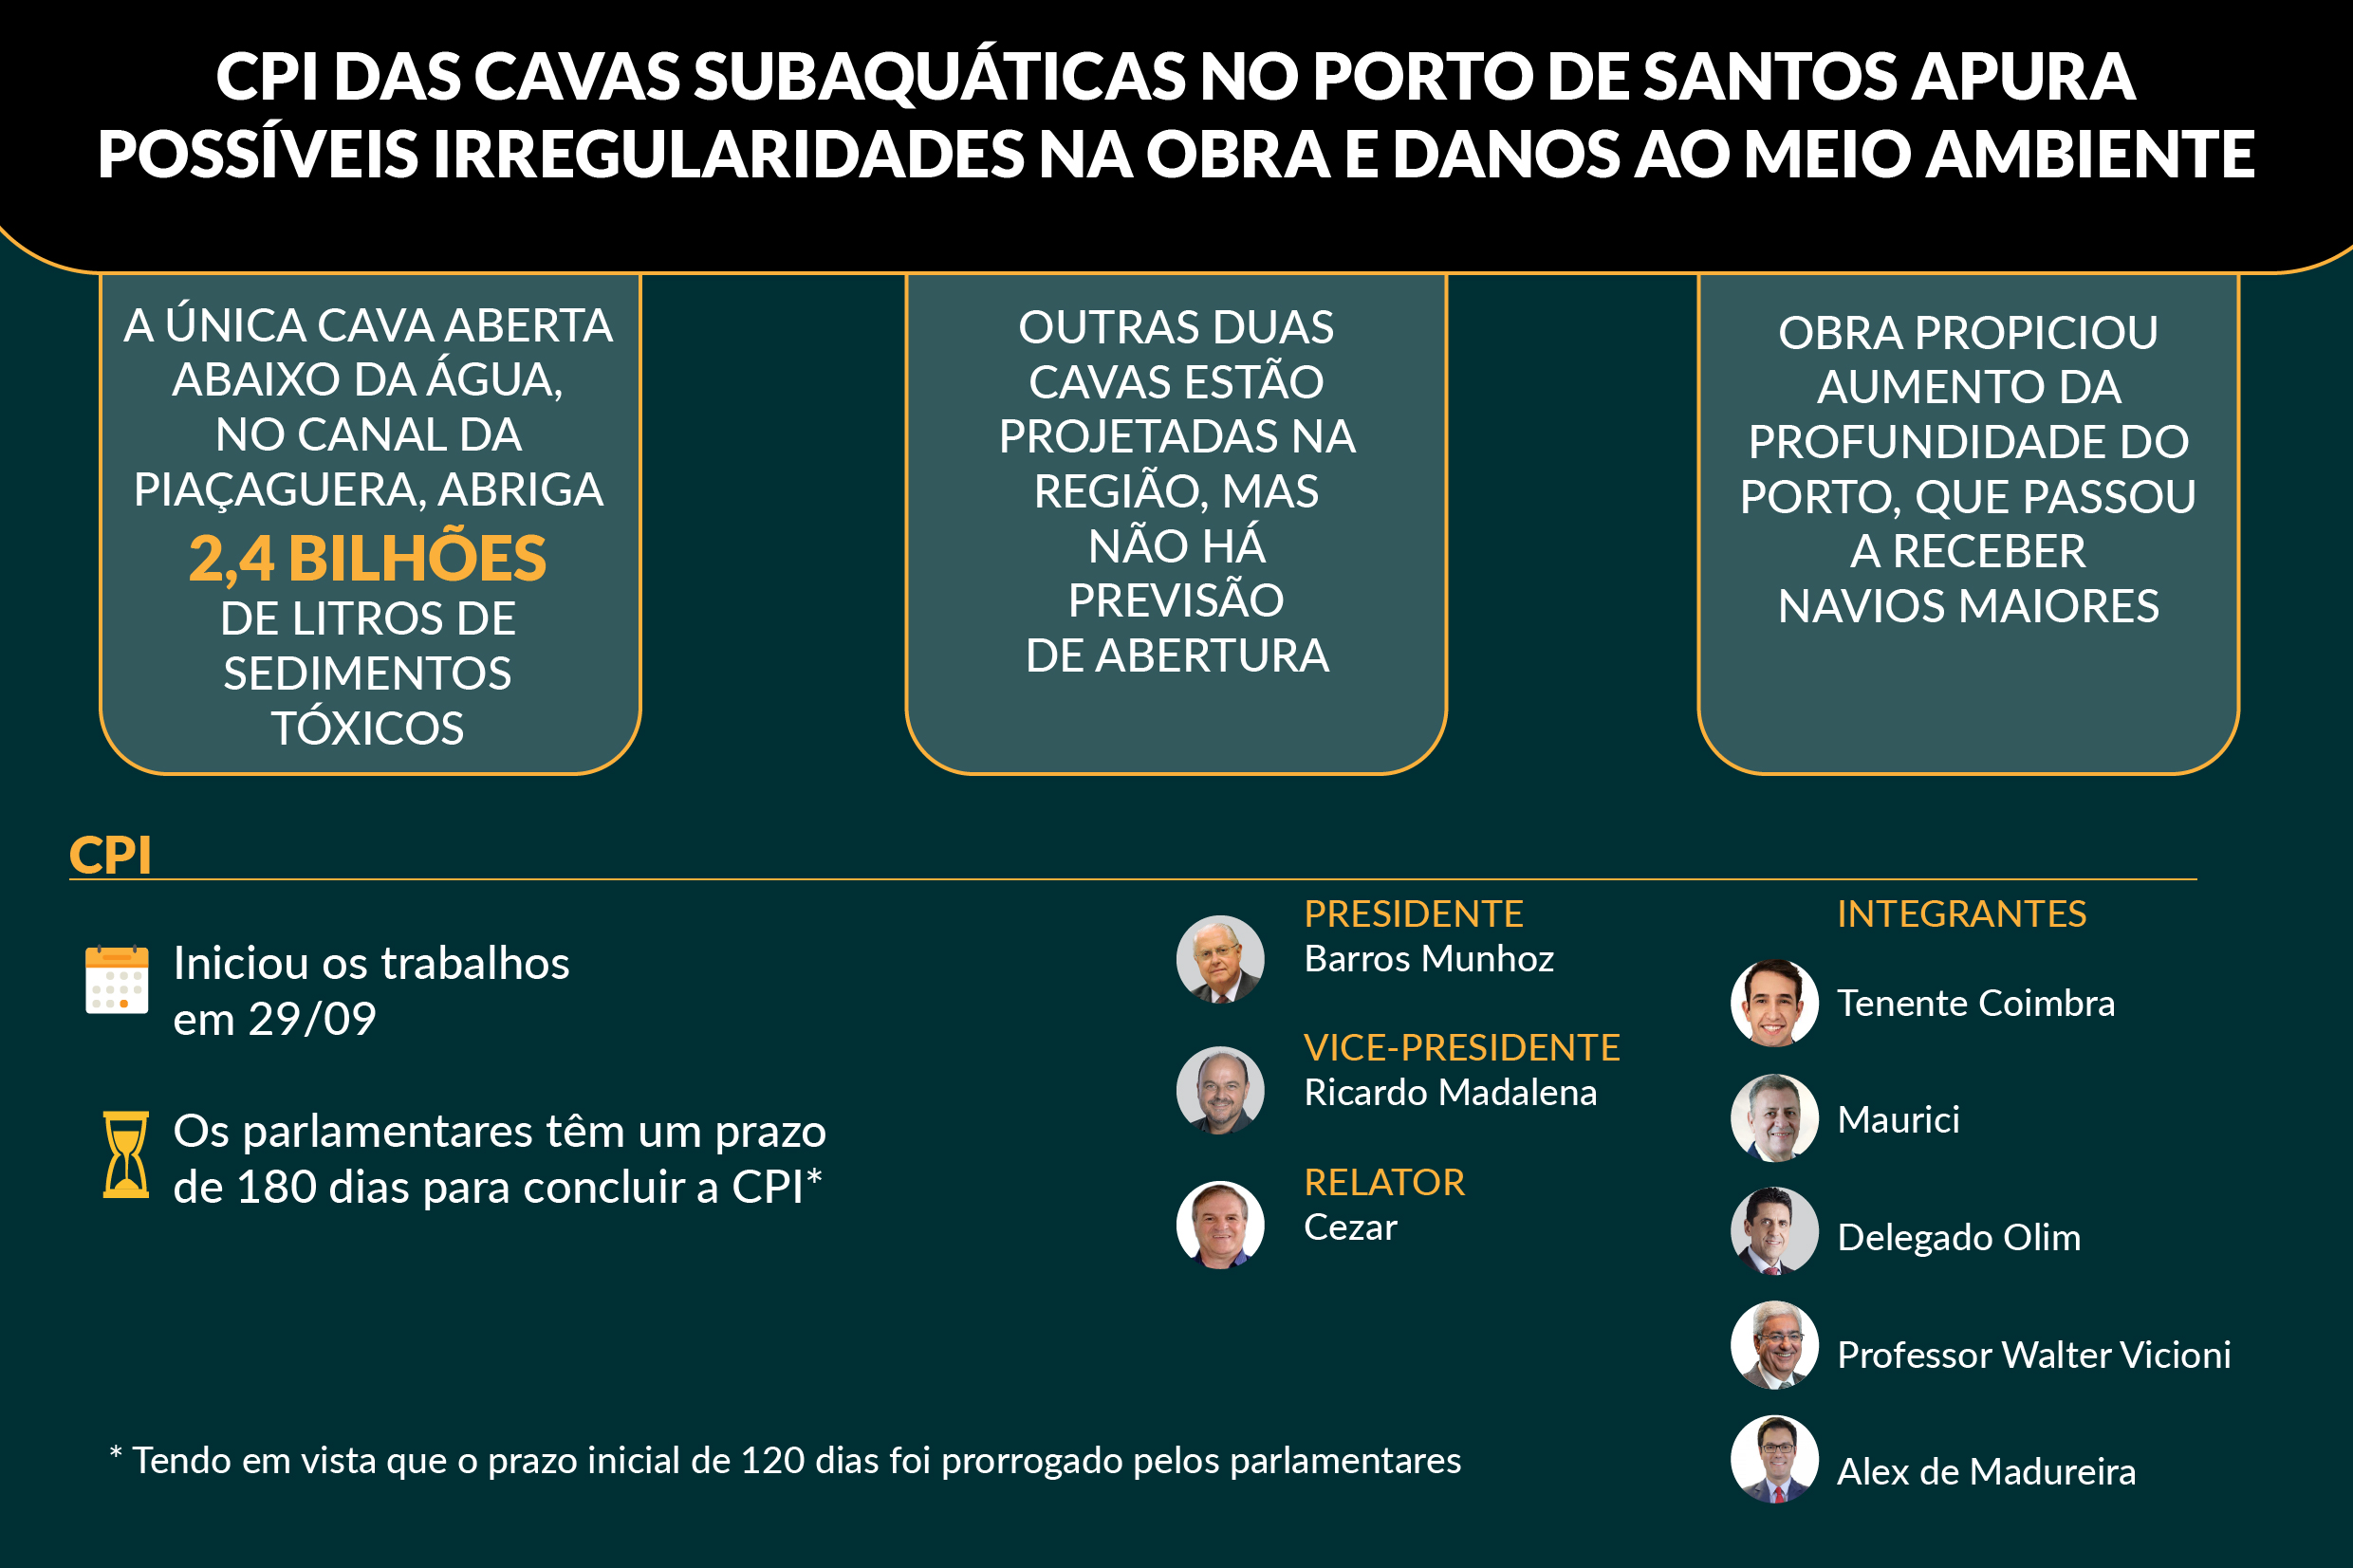 Infográfico <a style='float:right' href='https://www3.al.sp.gov.br/repositorio/noticia/N-11-2021/fg279184.jpg' target=_blank><img src='/_img/material-file-download-white.png' width='14px' alt='Clique para baixar a imagem'></a>